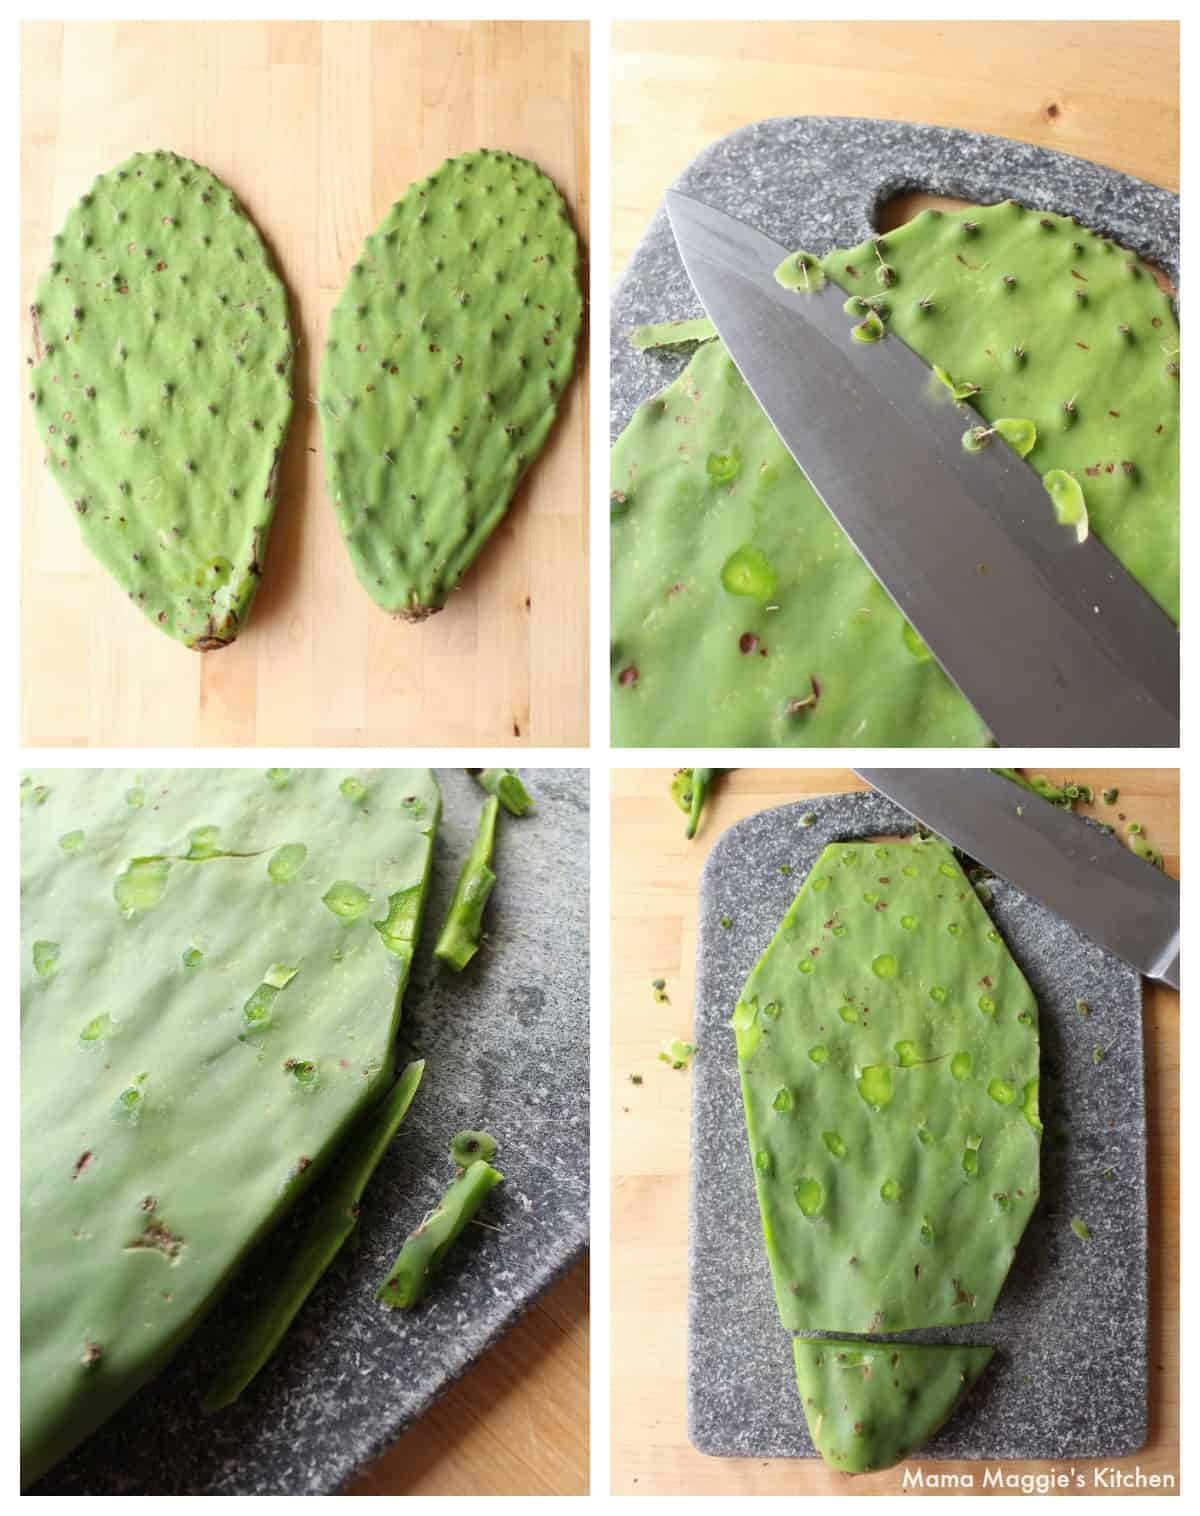 A collage showing how to clean cactus.